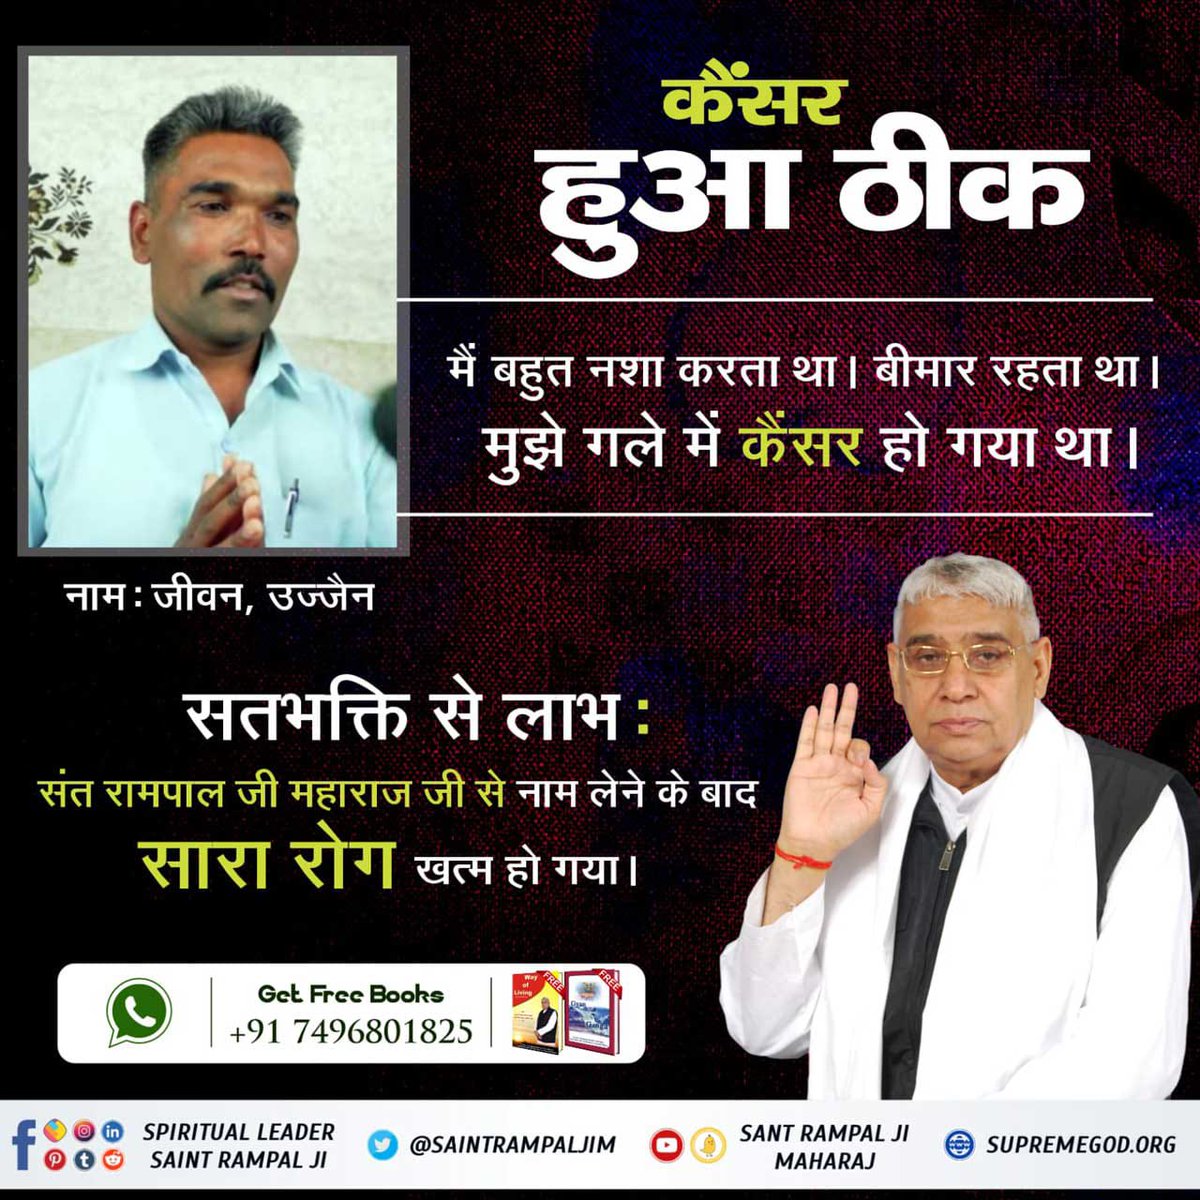 #ऐसे_सुख_देता_है_भगवान

Devotees are getting the same benefits from the method of devotion given by Sant Rampal Ji Maharaj as they were getting from the devotion told by Kabir Parmeshwar 600 years ago.
Sheetal, who is a resident of Rohini, Delhi, was suffering from cancer,